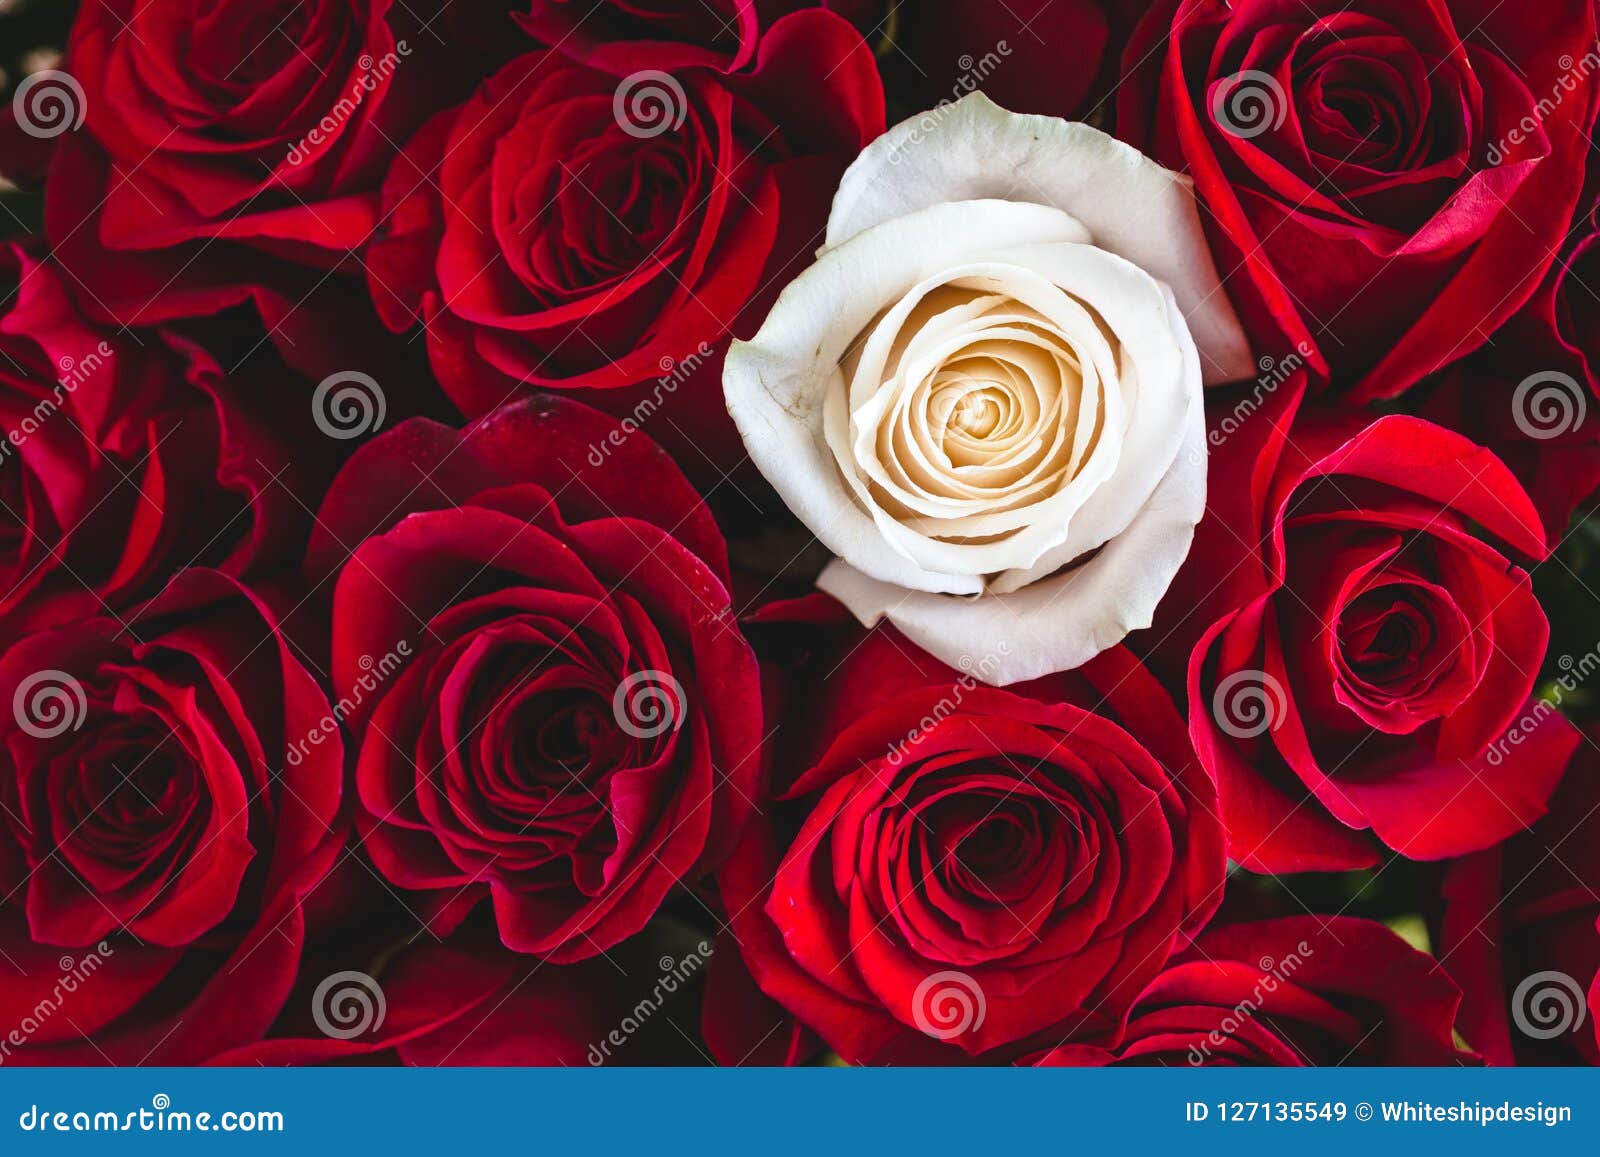 Bouquet of Red Roses with One White Rose in between Stock Image - Image of  engaged, fragility: 127135549